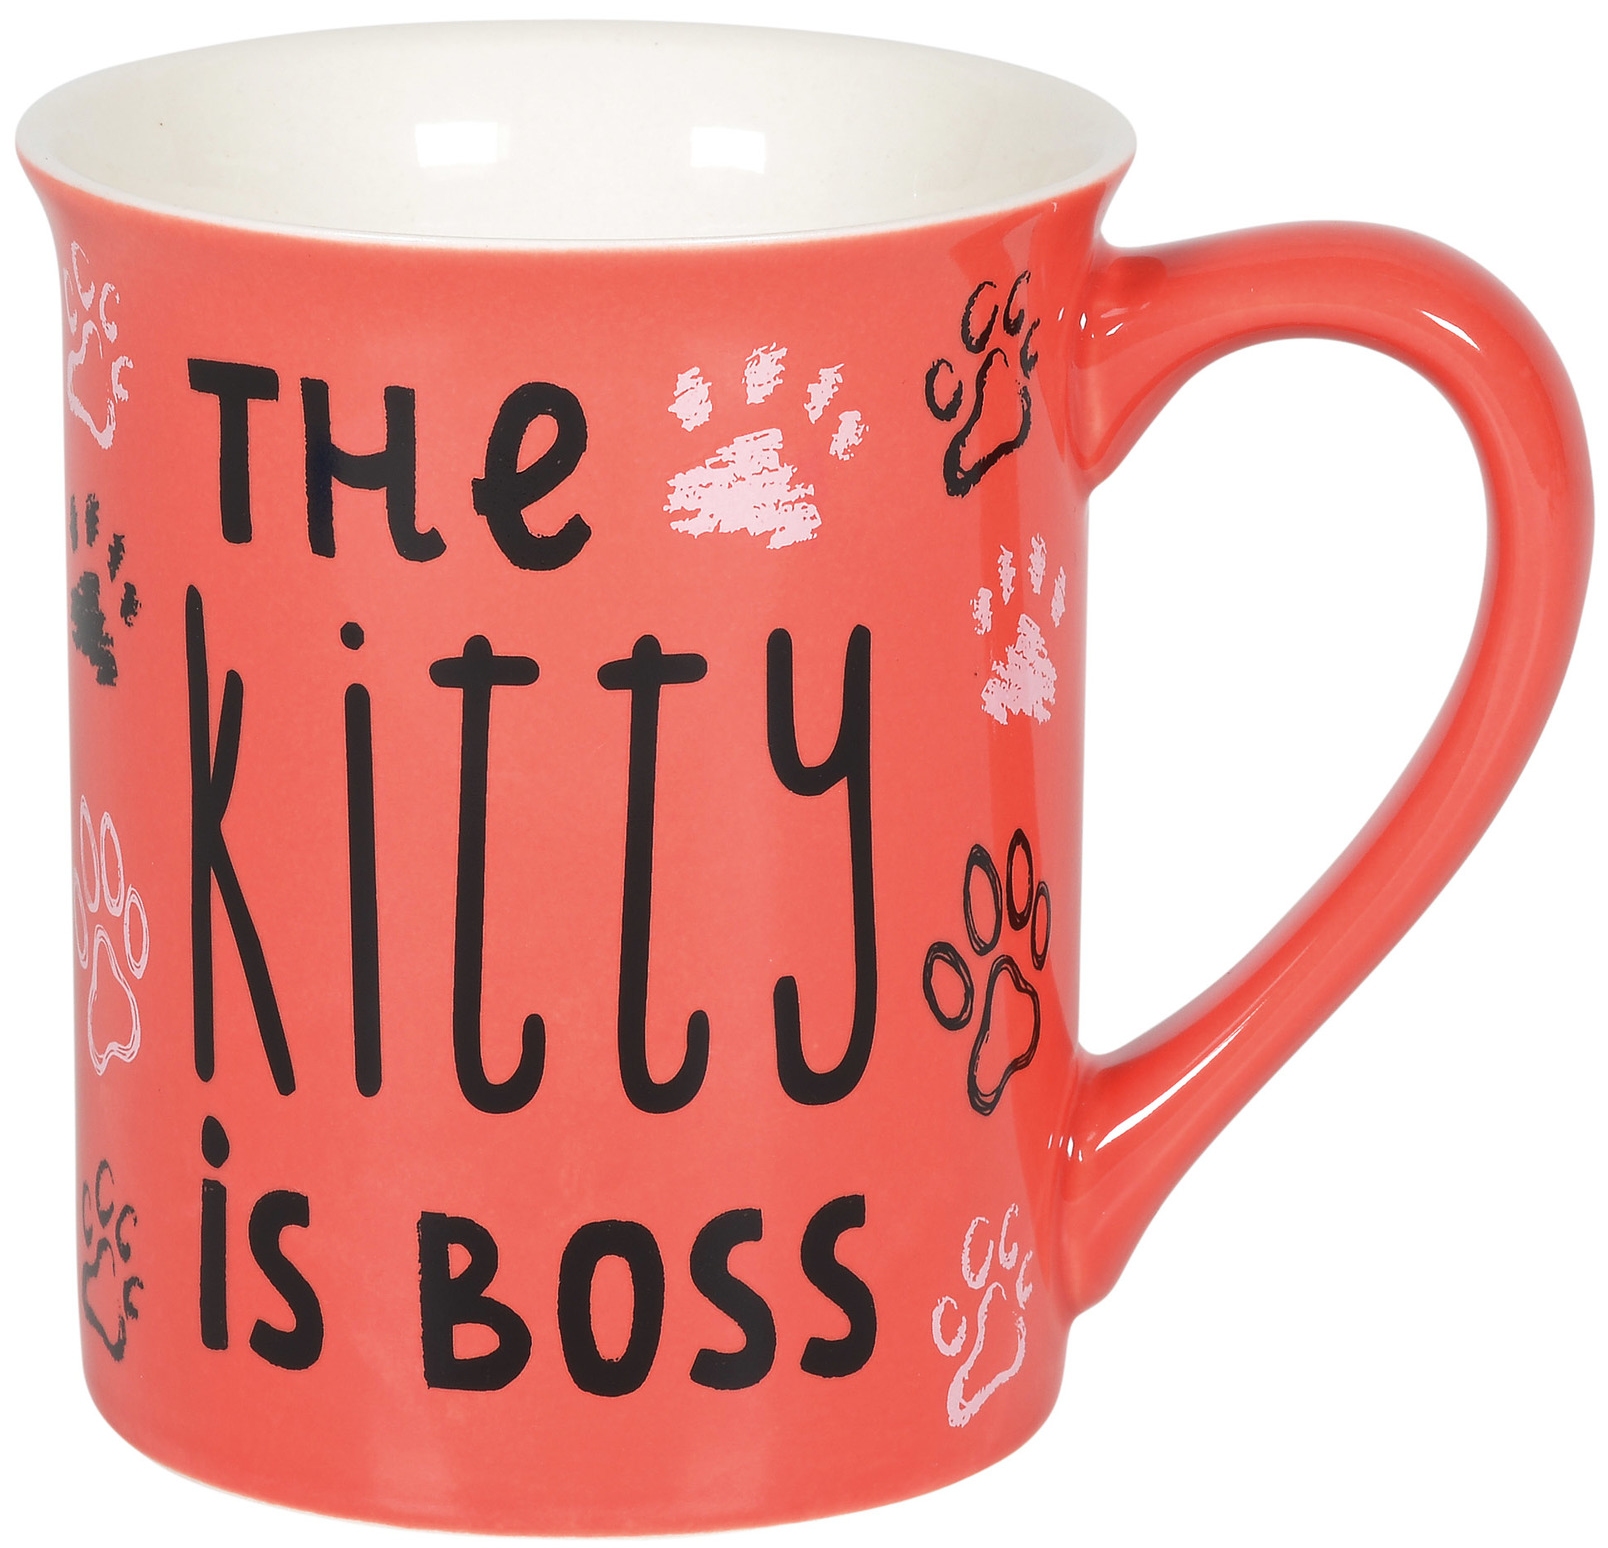 Our Name Is Mud 6005725 Kitty Is Boss Mug Set of 2